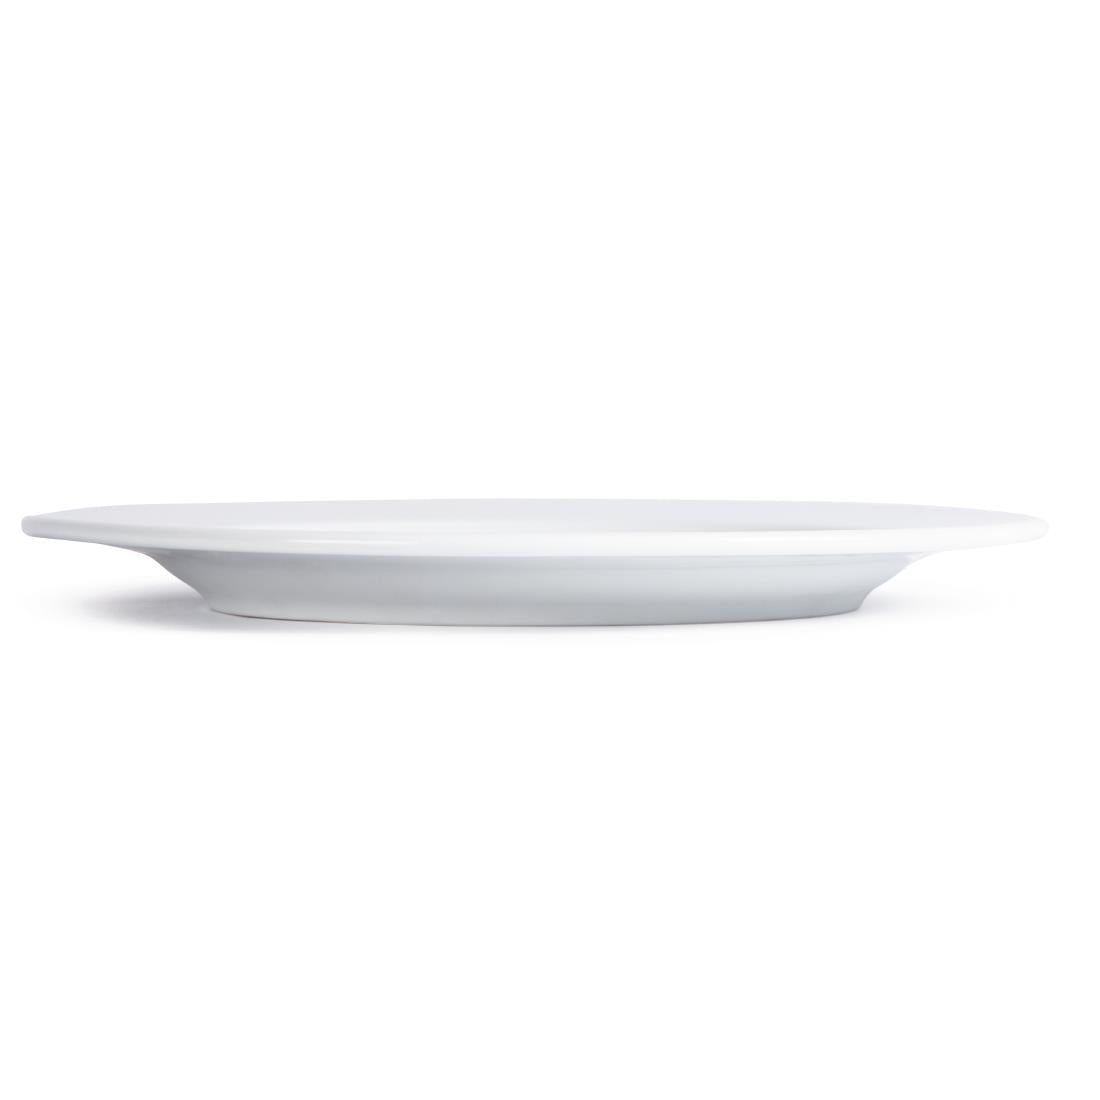 Royal Porcelain Classic White Wide Rim Plates 260mm (Pack of 12)